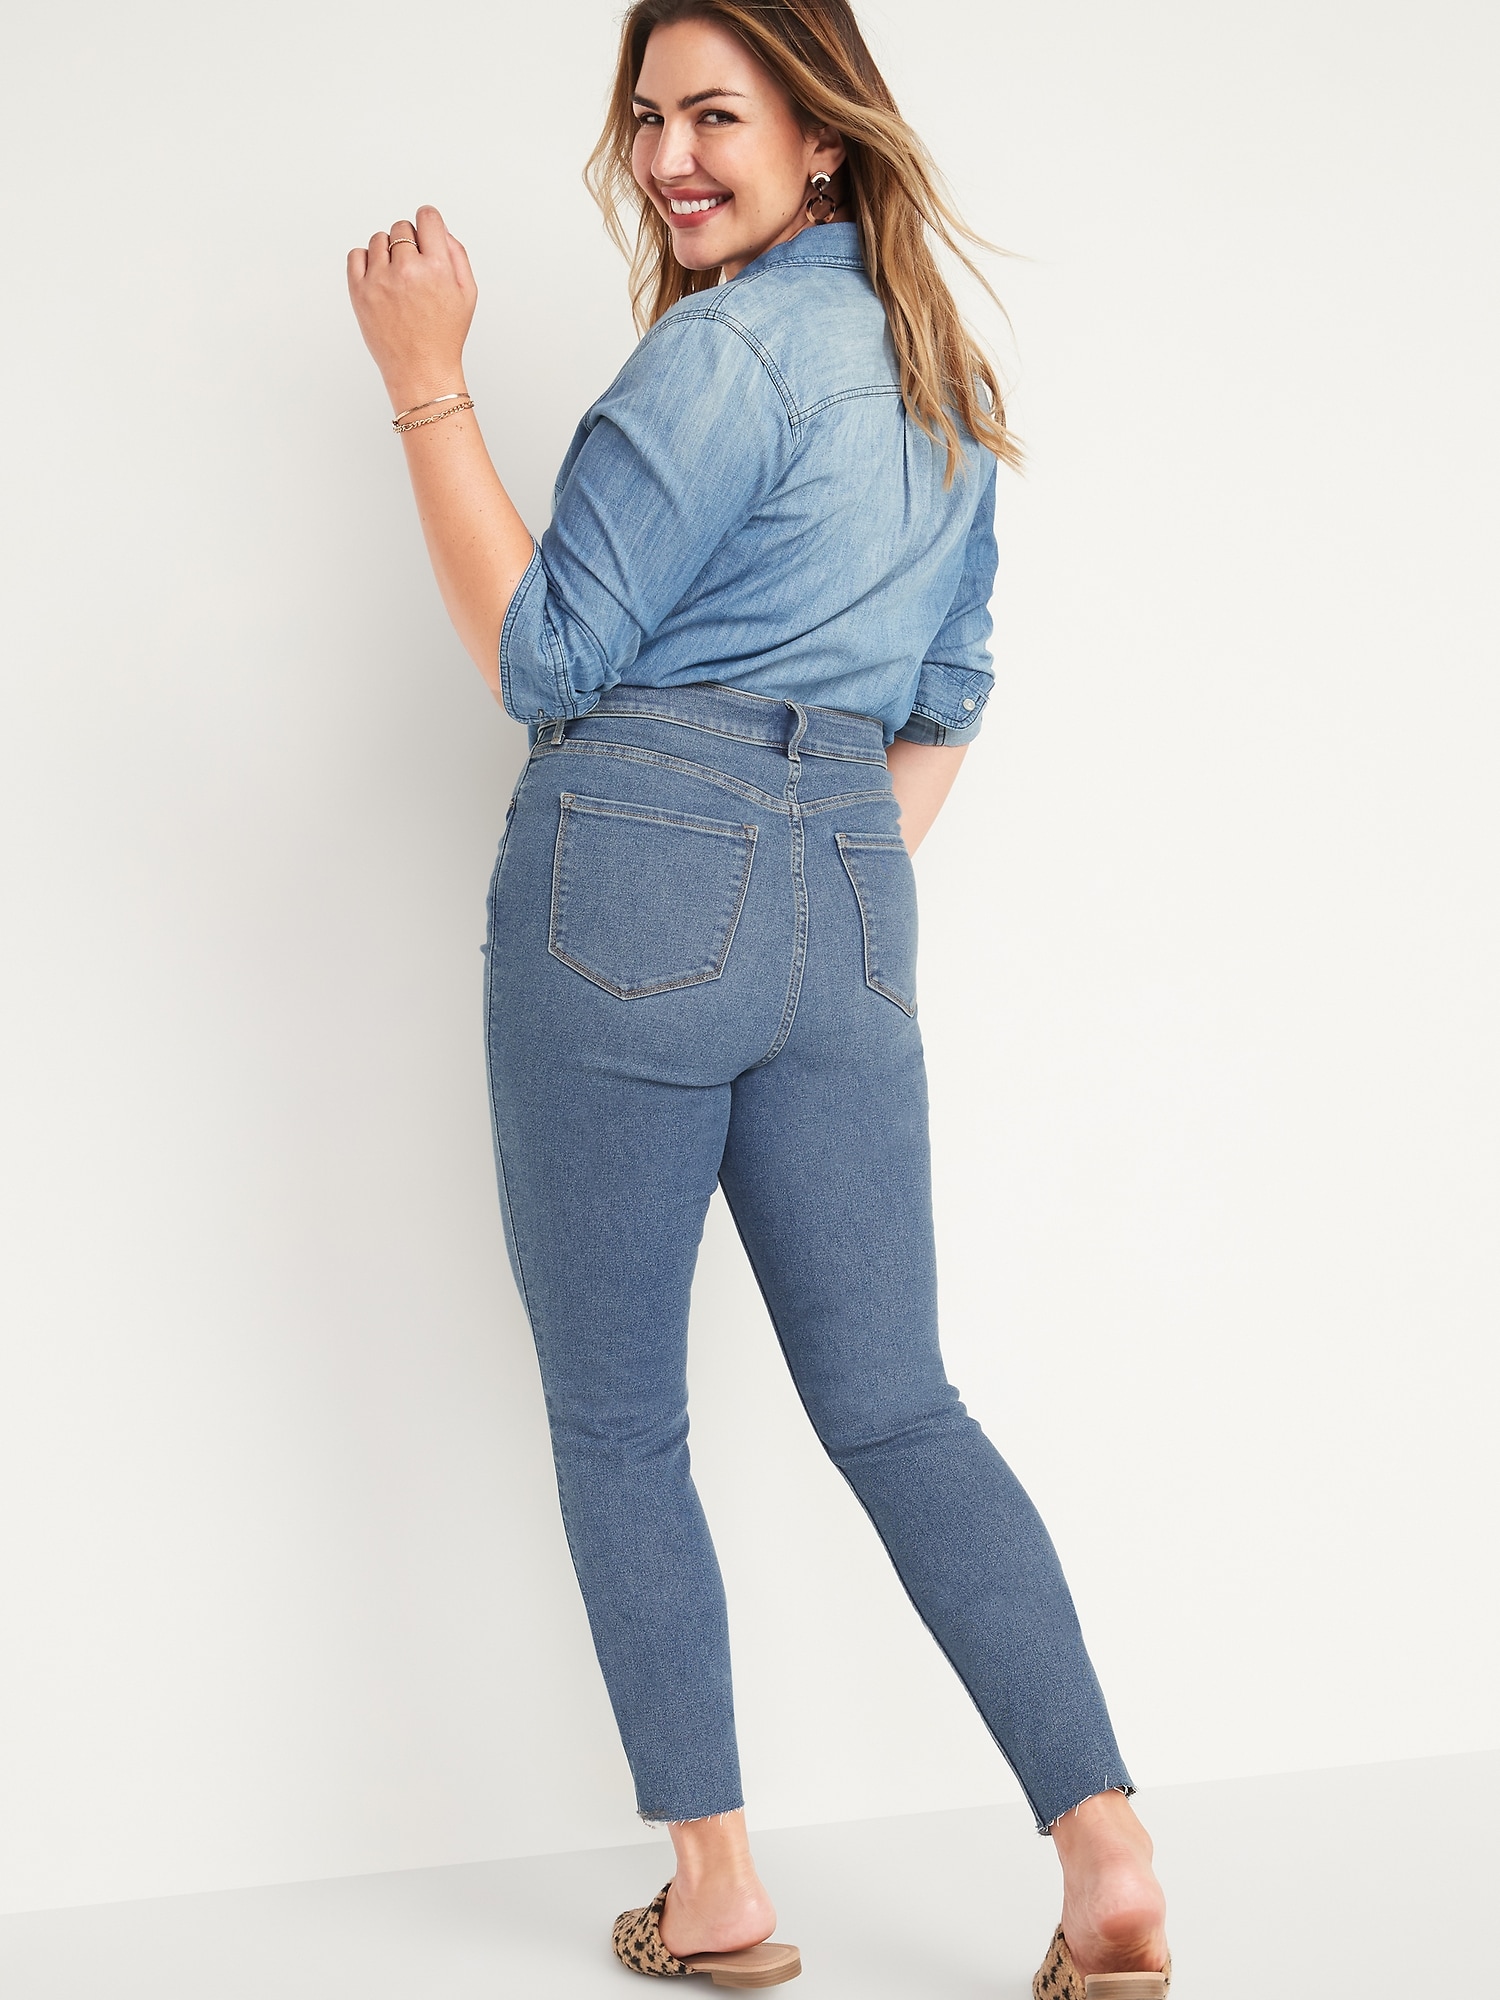 old navy rockstar button fly jeans - OFF-60% >Free Delivery